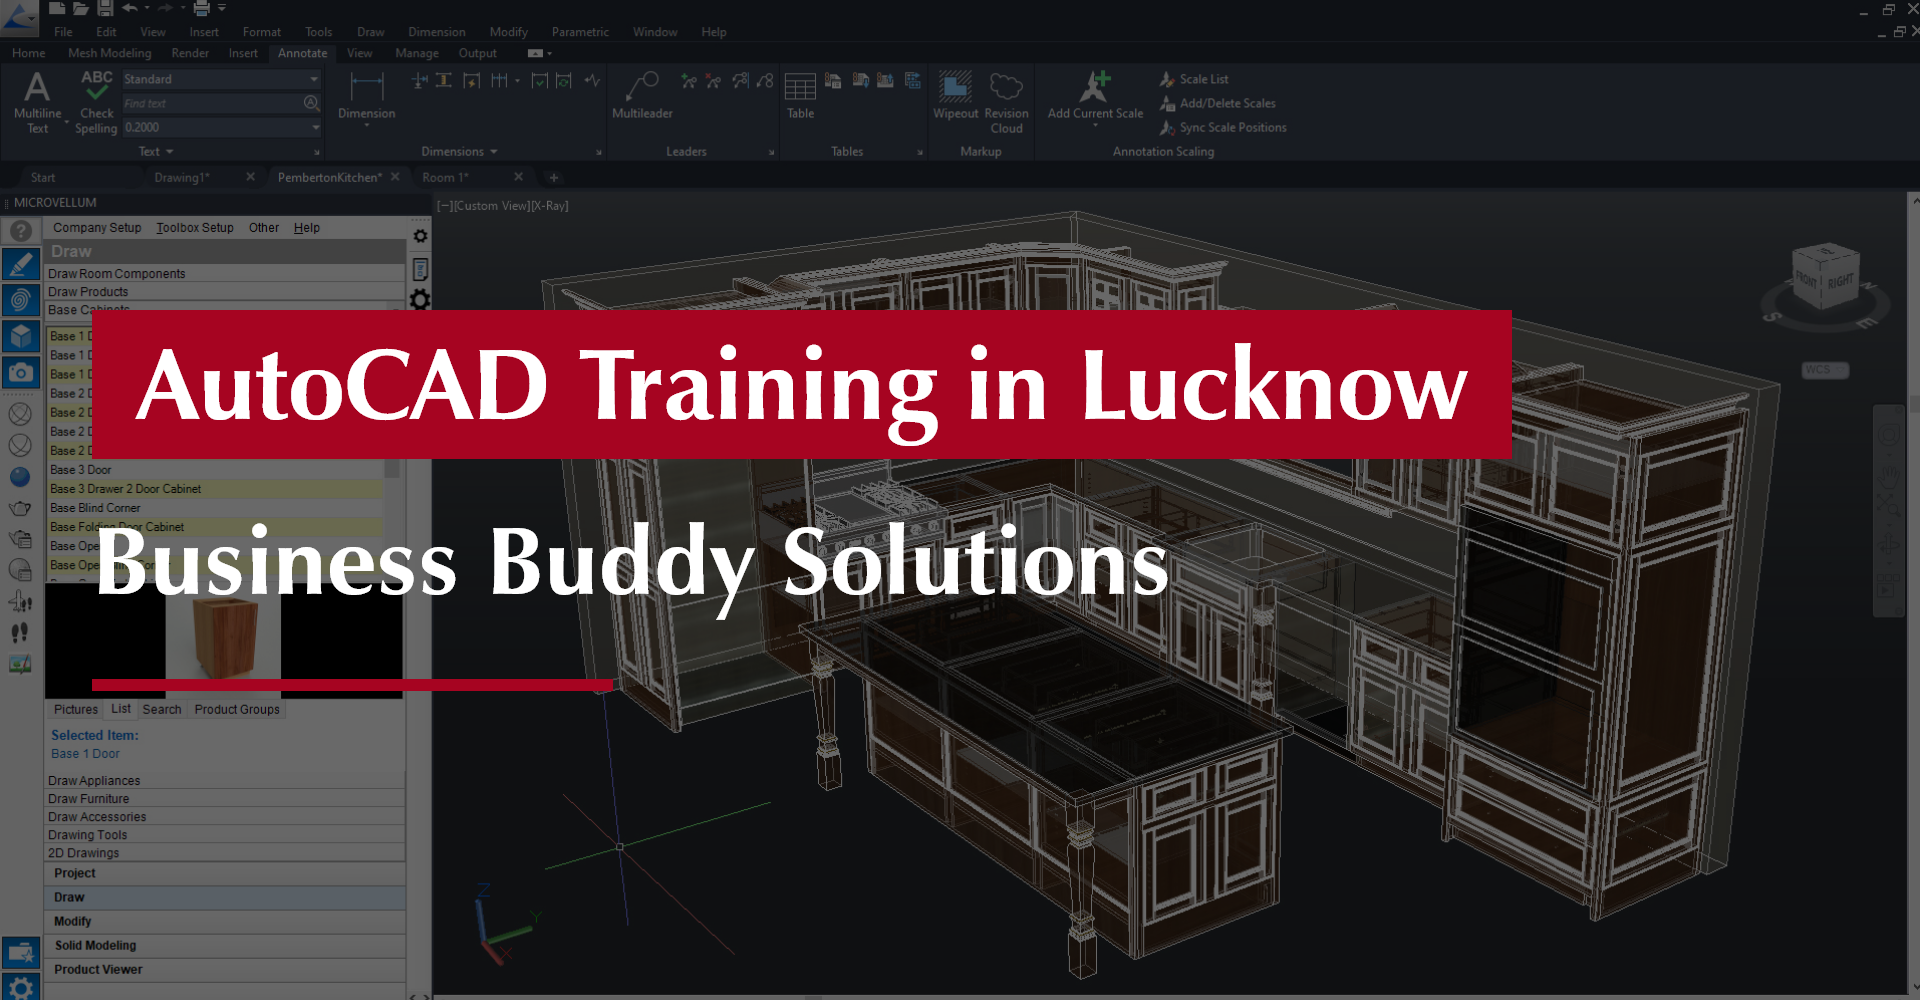 AutoCAD Training in Lucknow- Business Buddy Solutions